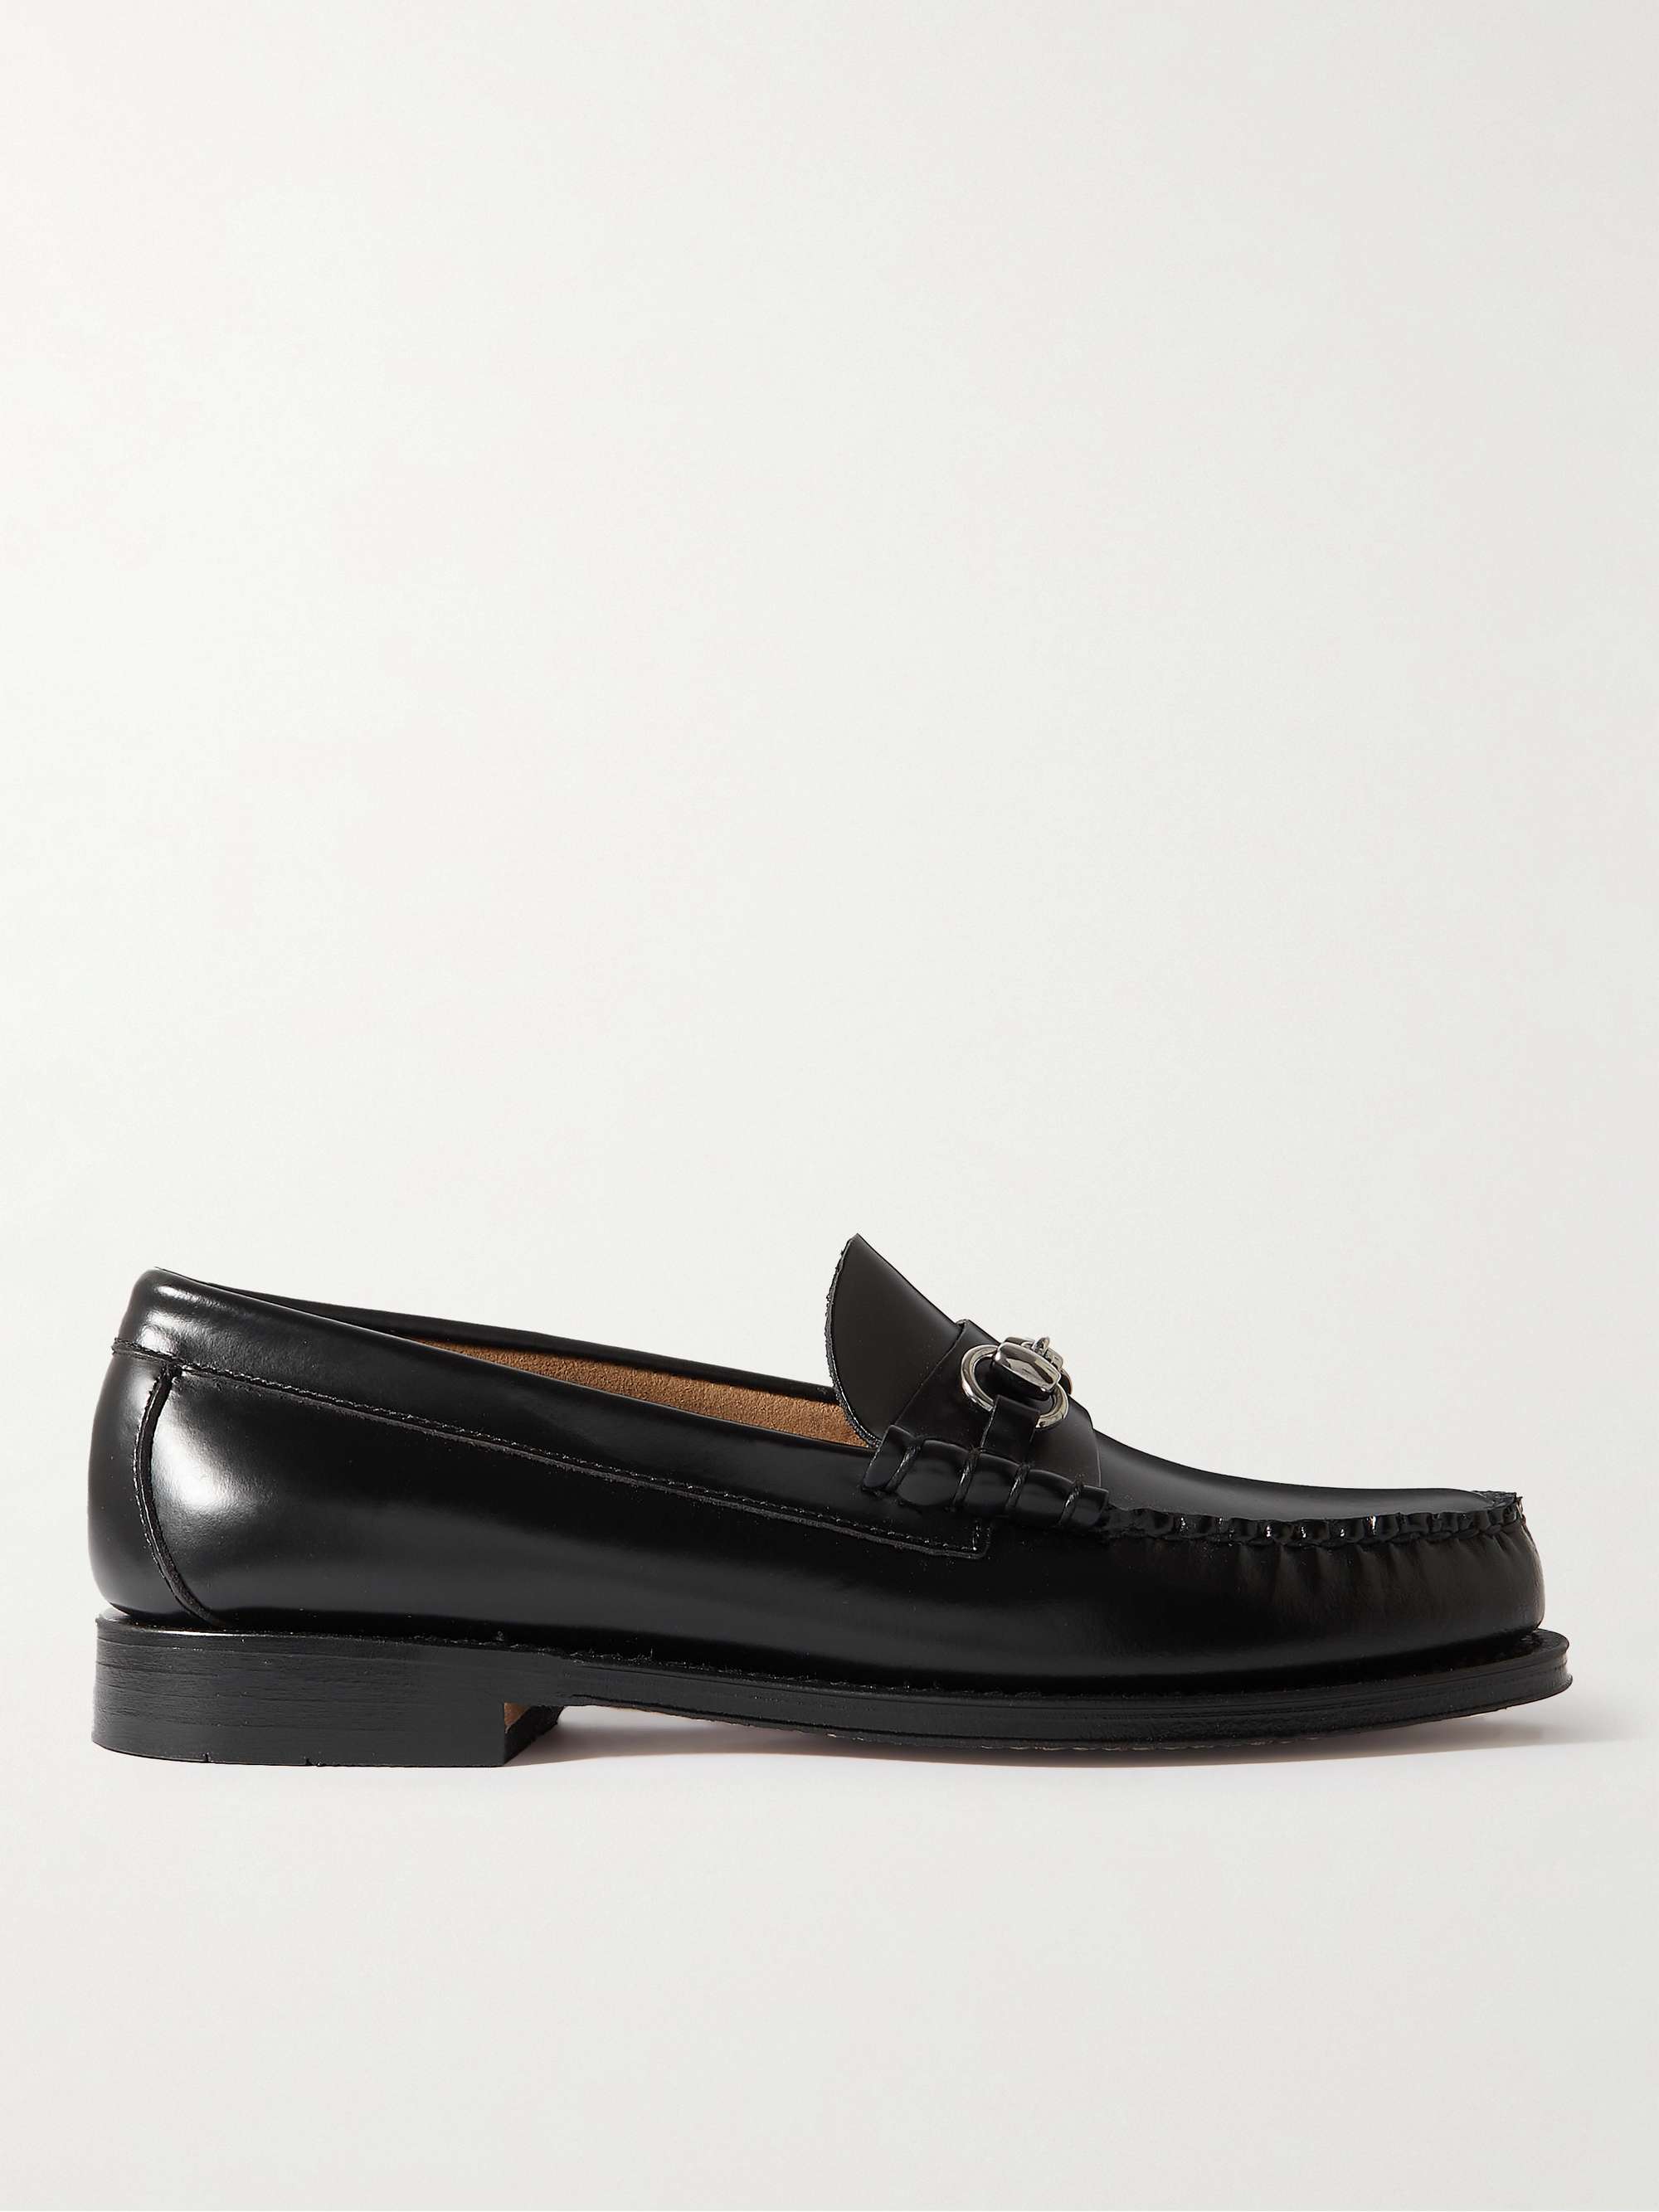 G.H. BASS & CO. Weejuns Heritage Lincoln Leather Penny Loafers | MR PORTER